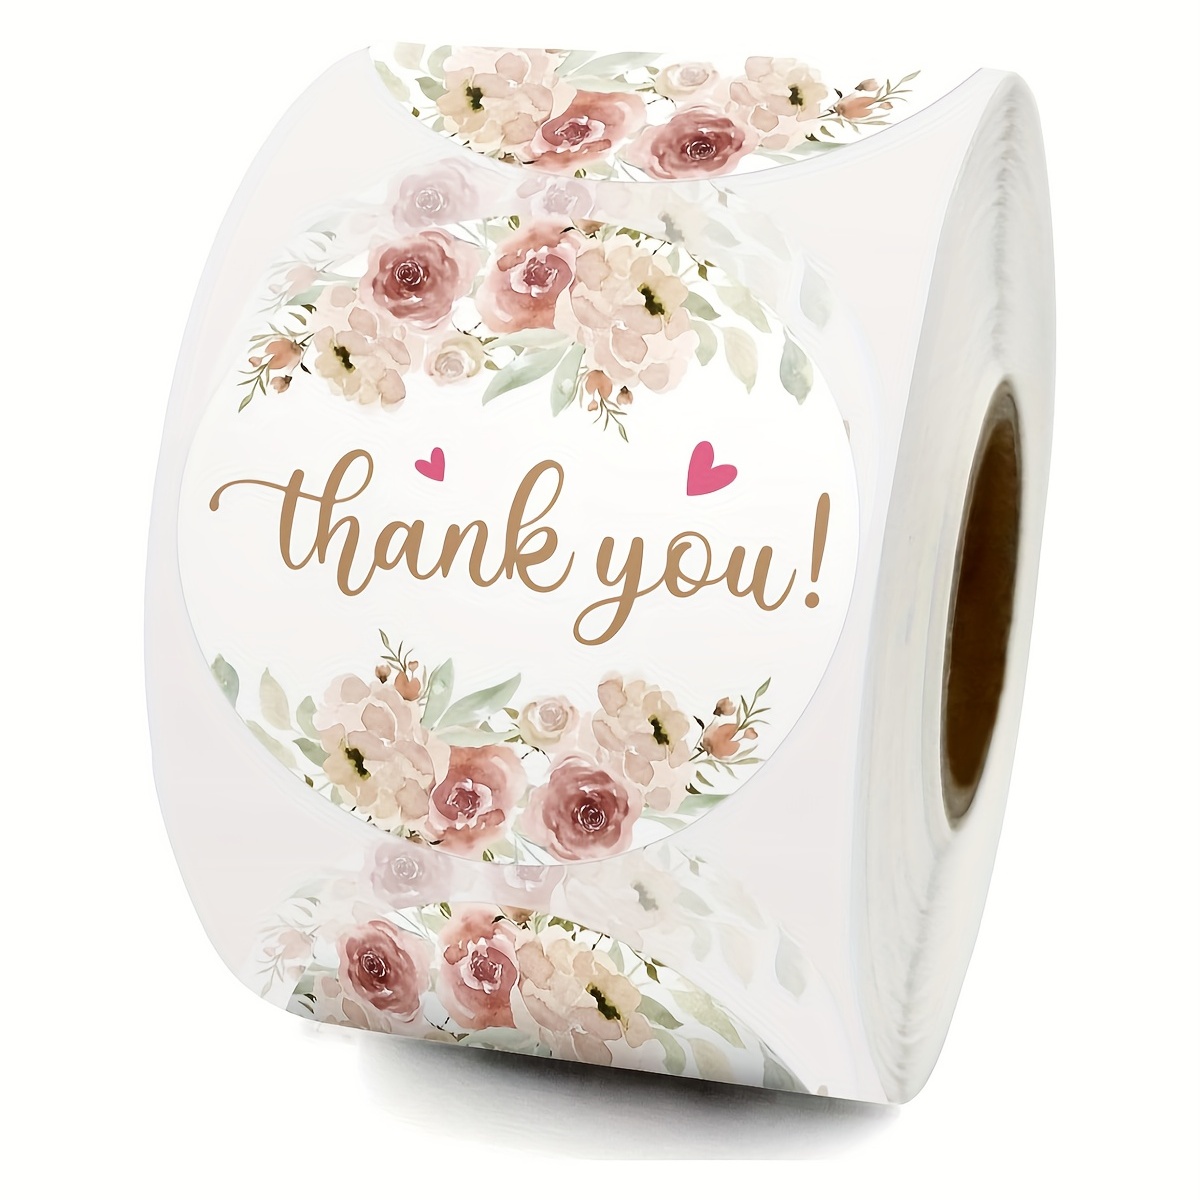 

500pcs/roll Adorable Flower Thank You Stickers - Perfect For Small Business, Bakery Packaging, Wedding Giveaways & Bridal Shower Parties!